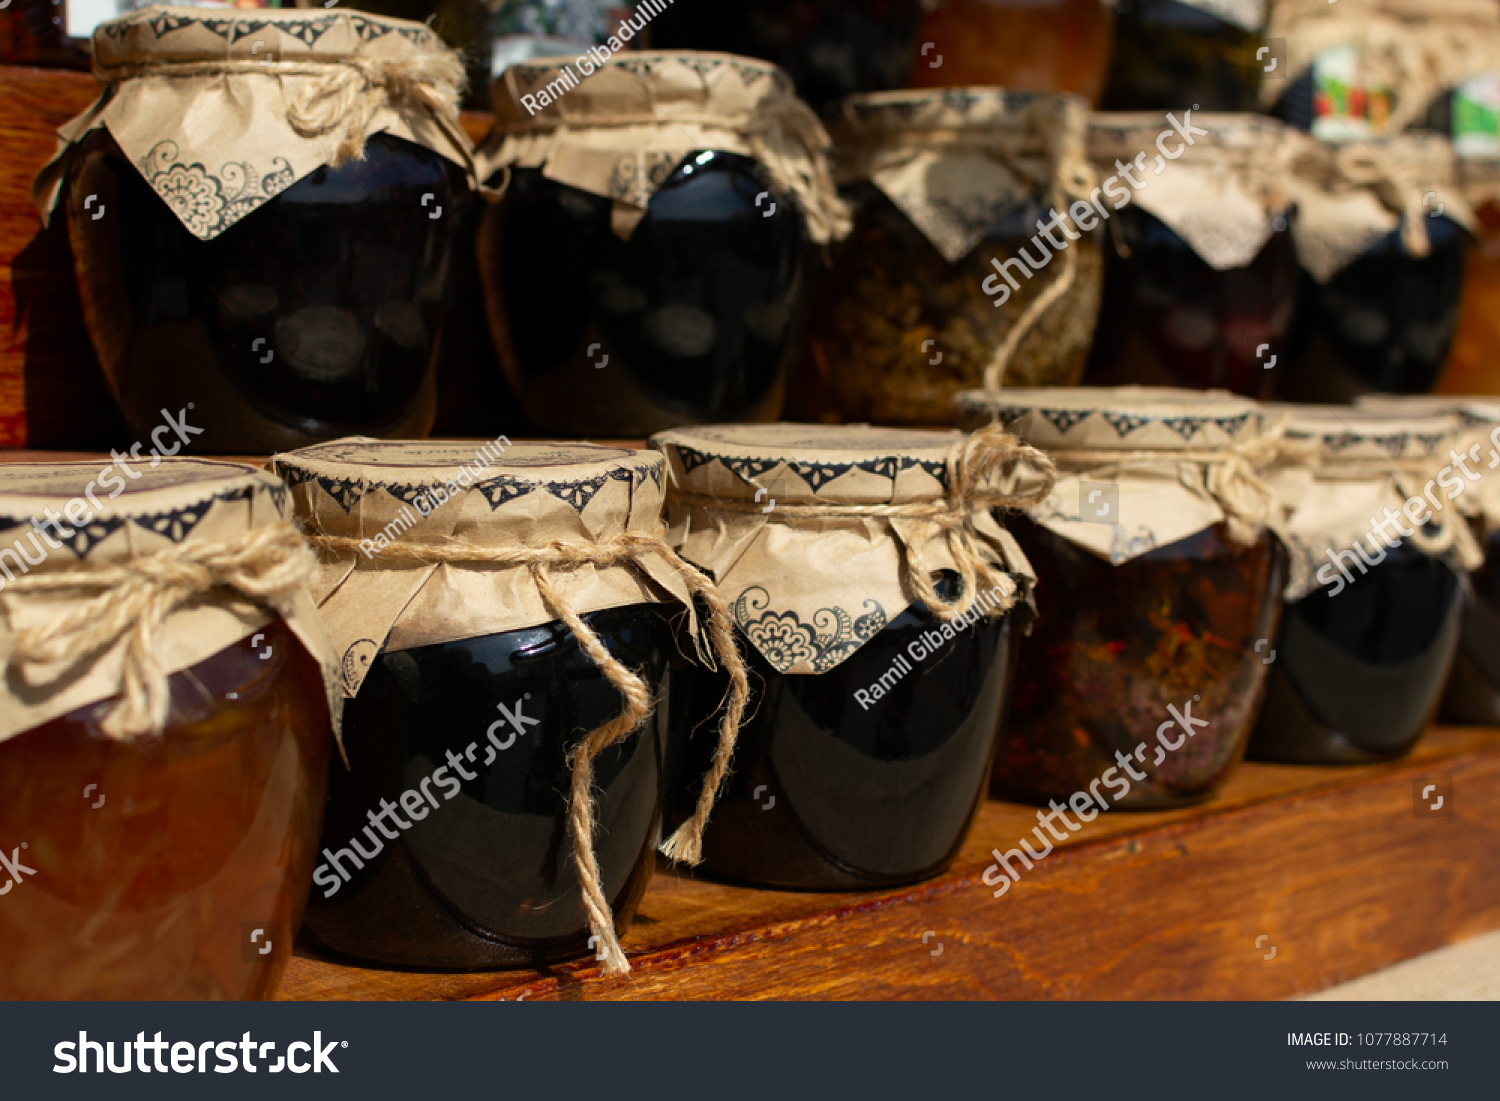 Shelves with composed handmade jam conserved in glass jars and decorated with strings. #1077887714